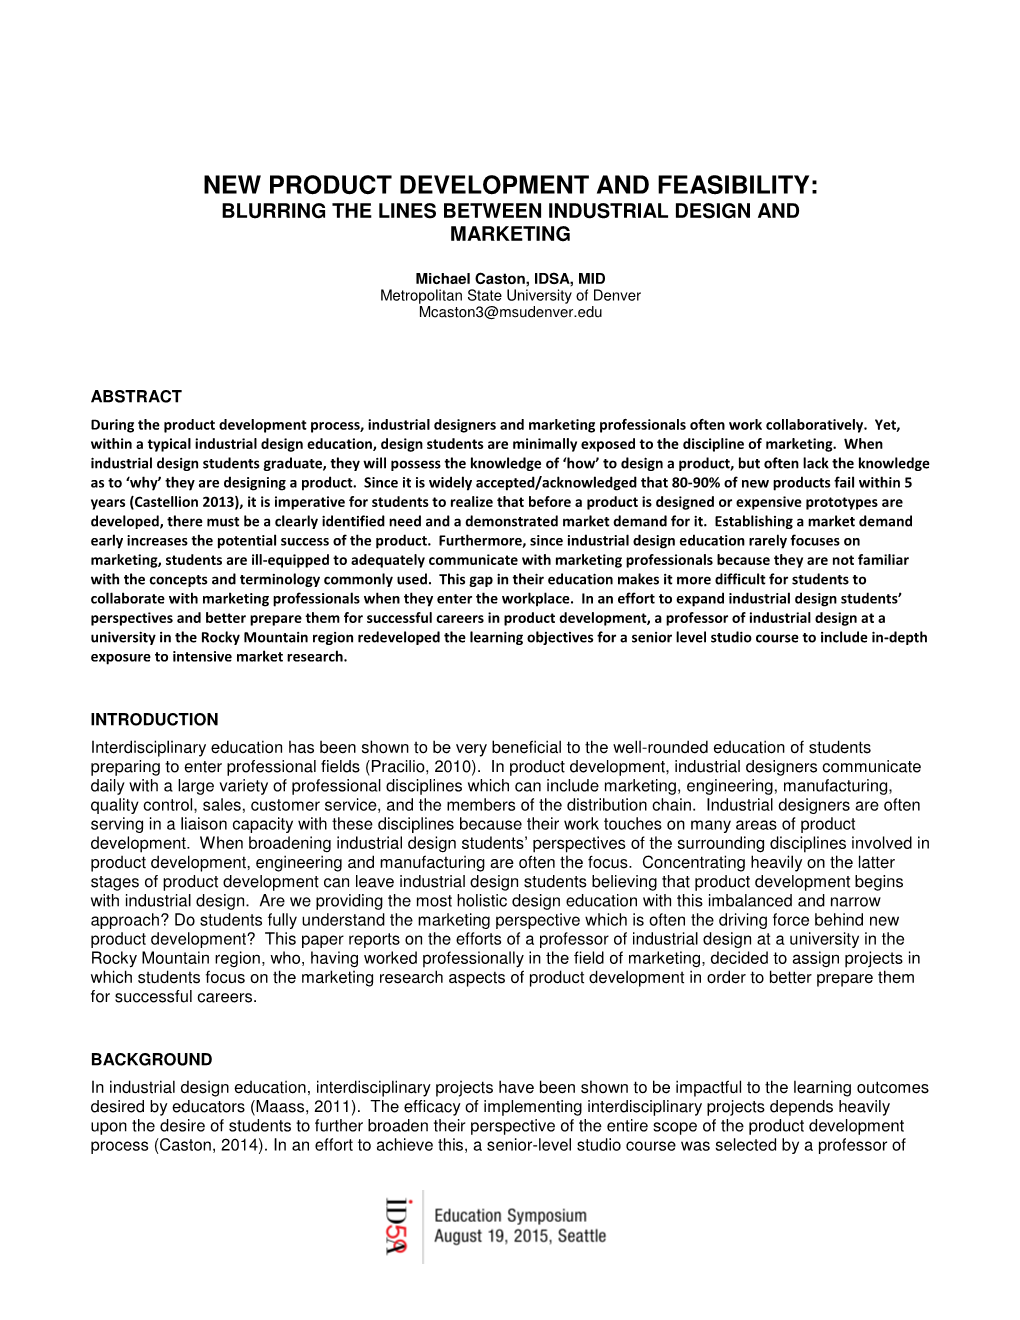 New Product Development and Feasibility: Blurring the Lines Between Industrial Design and Marketing